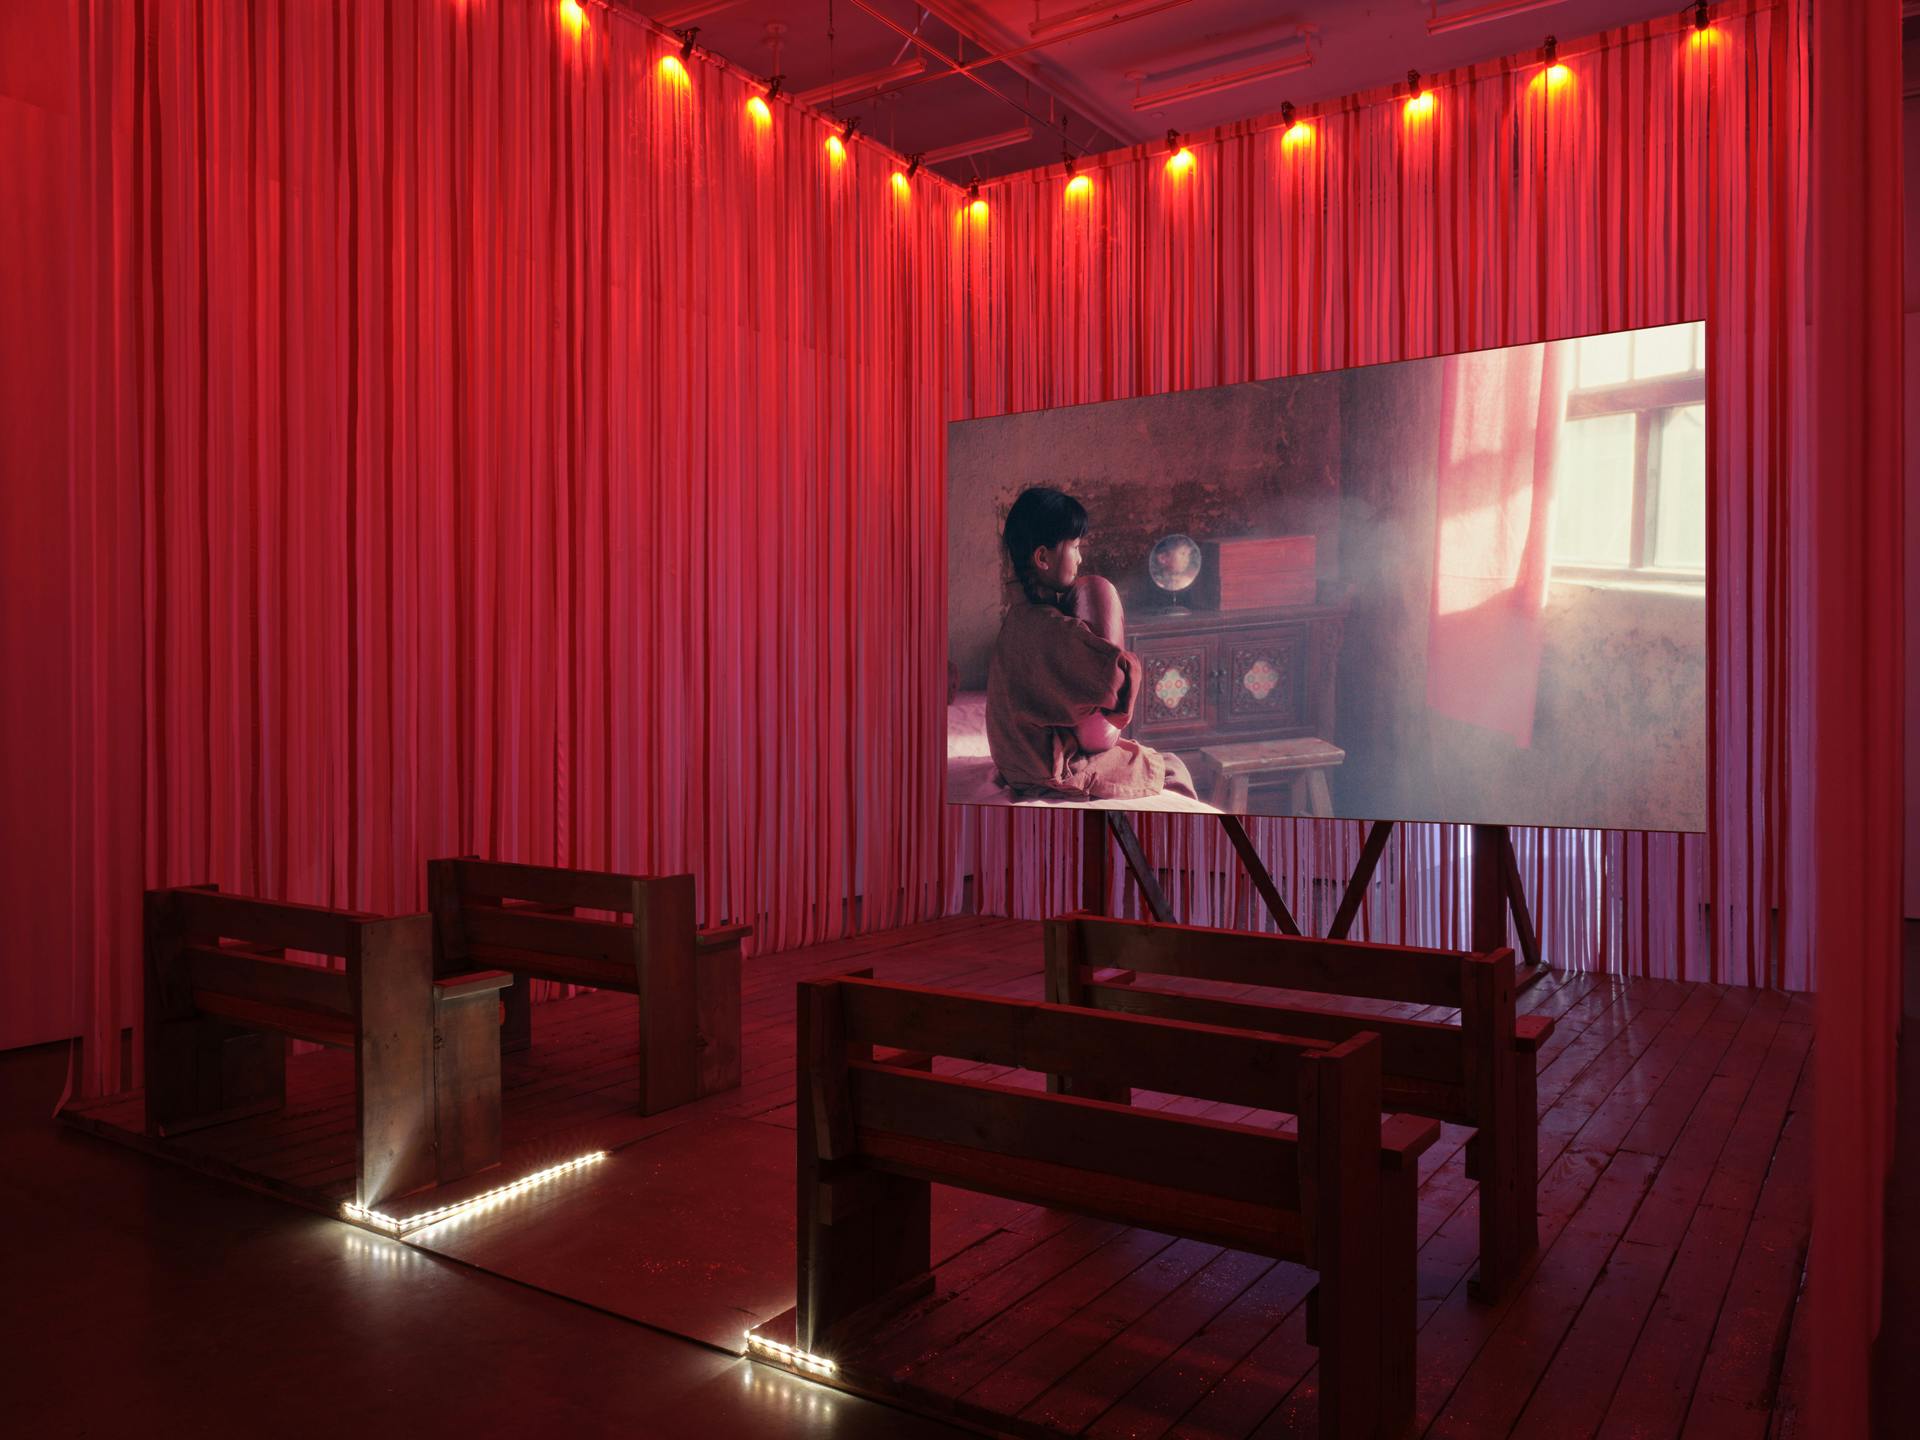 Diagonal view of four benches facing a large screen with pink and red ribbons forming a curtain around the perimeter. Onscreen, a child sits on a bed in a dark room, clutching a pink object and looking out a window.